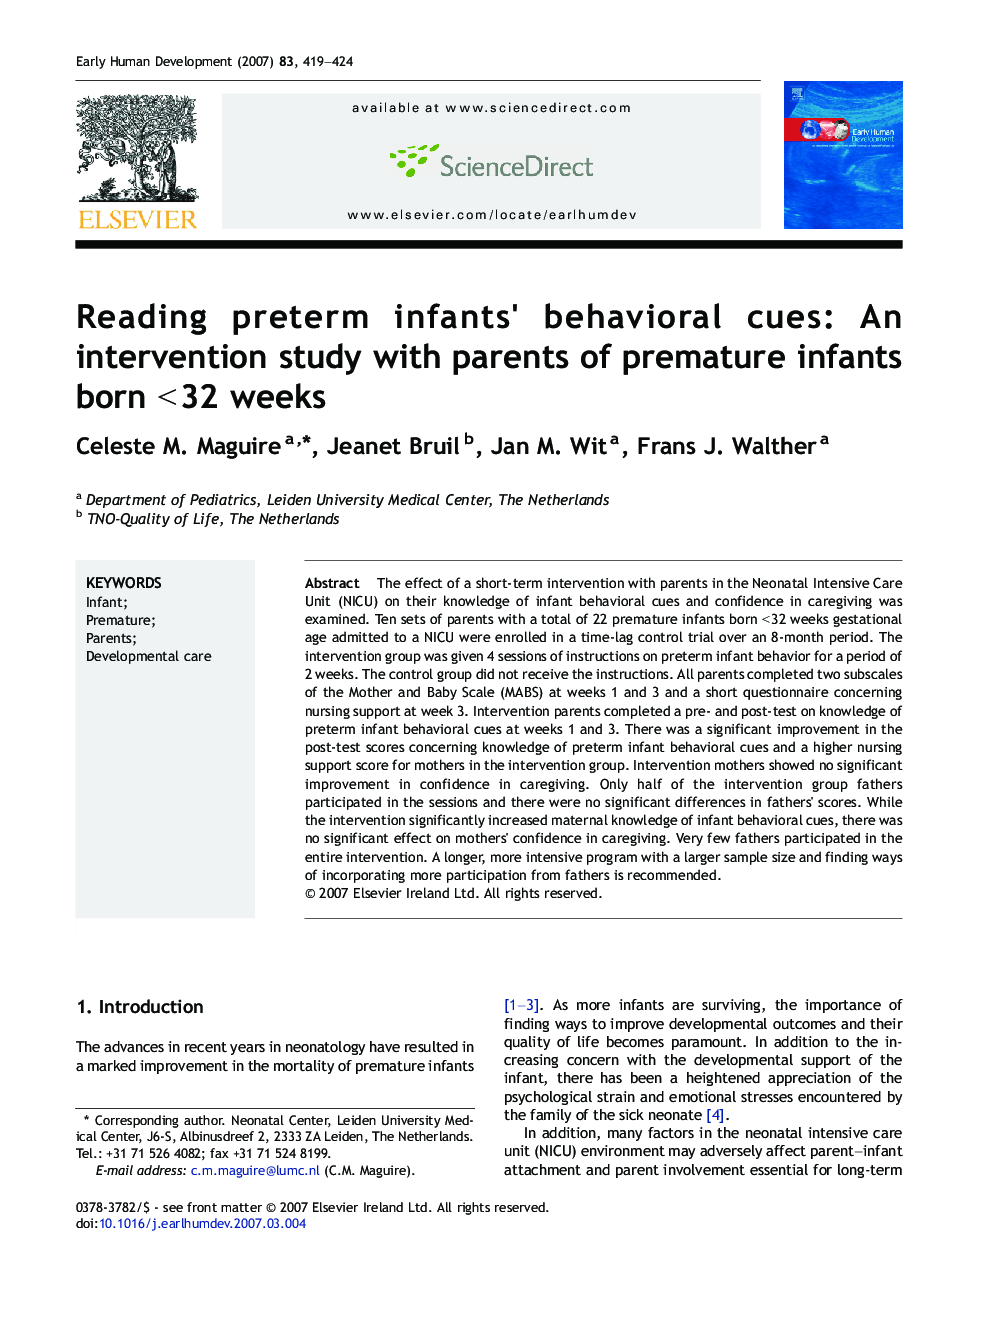 Reading preterm infants' behavioral cues: An intervention study with parents of premature infants born < 32 weeks